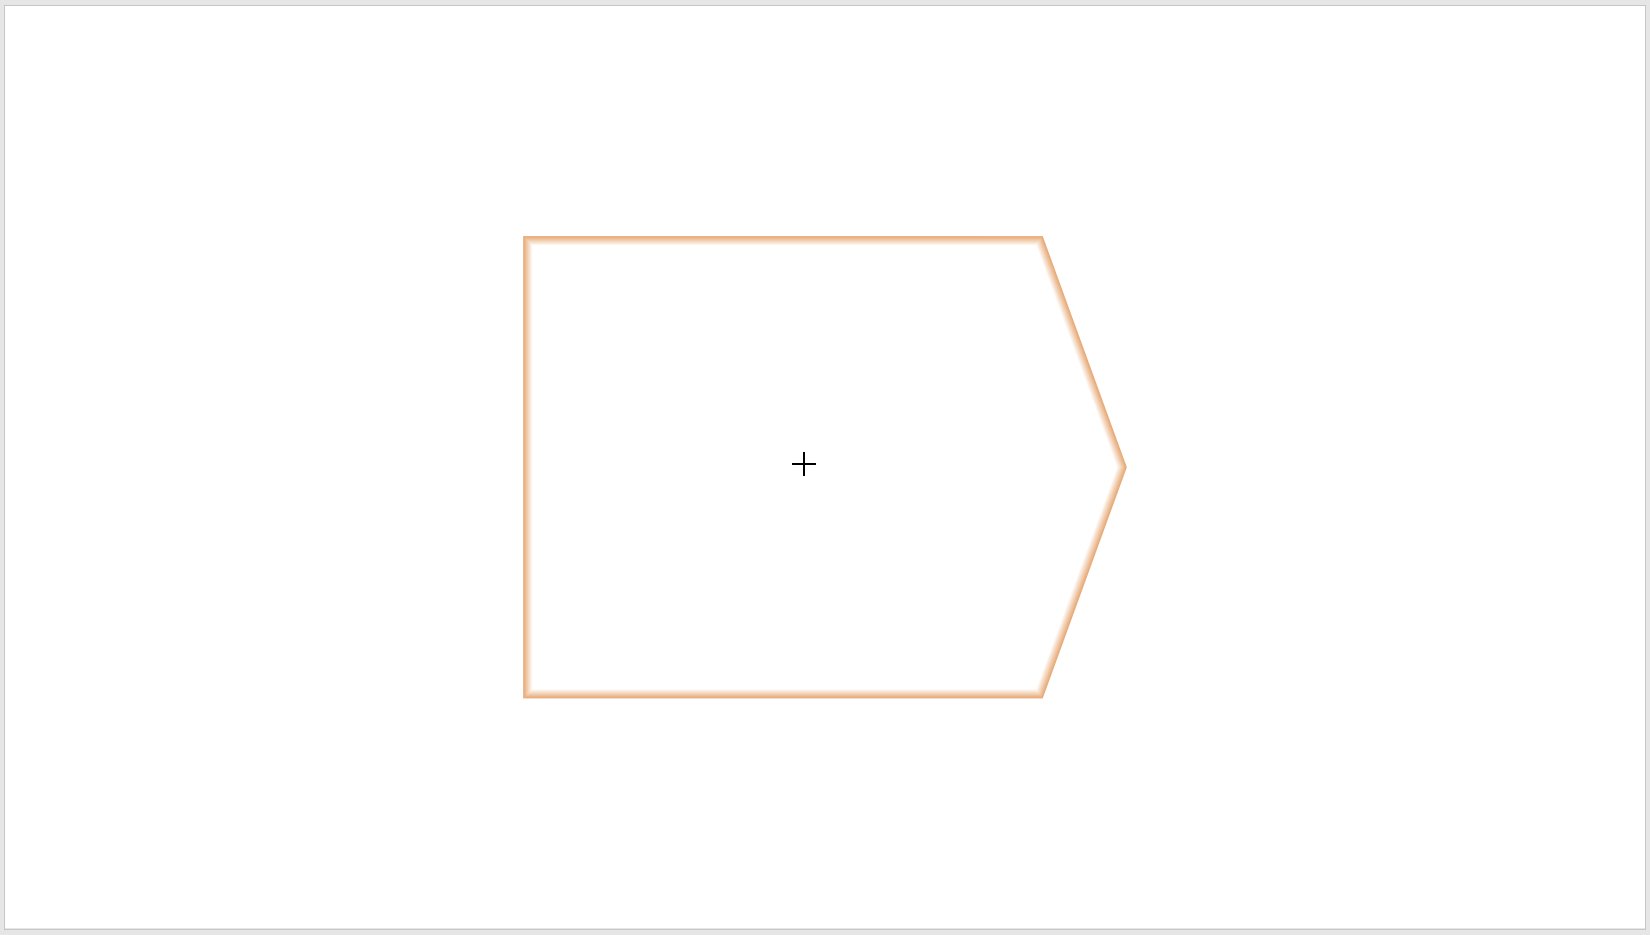 placeholder outlines shown when inserting a pentagon.